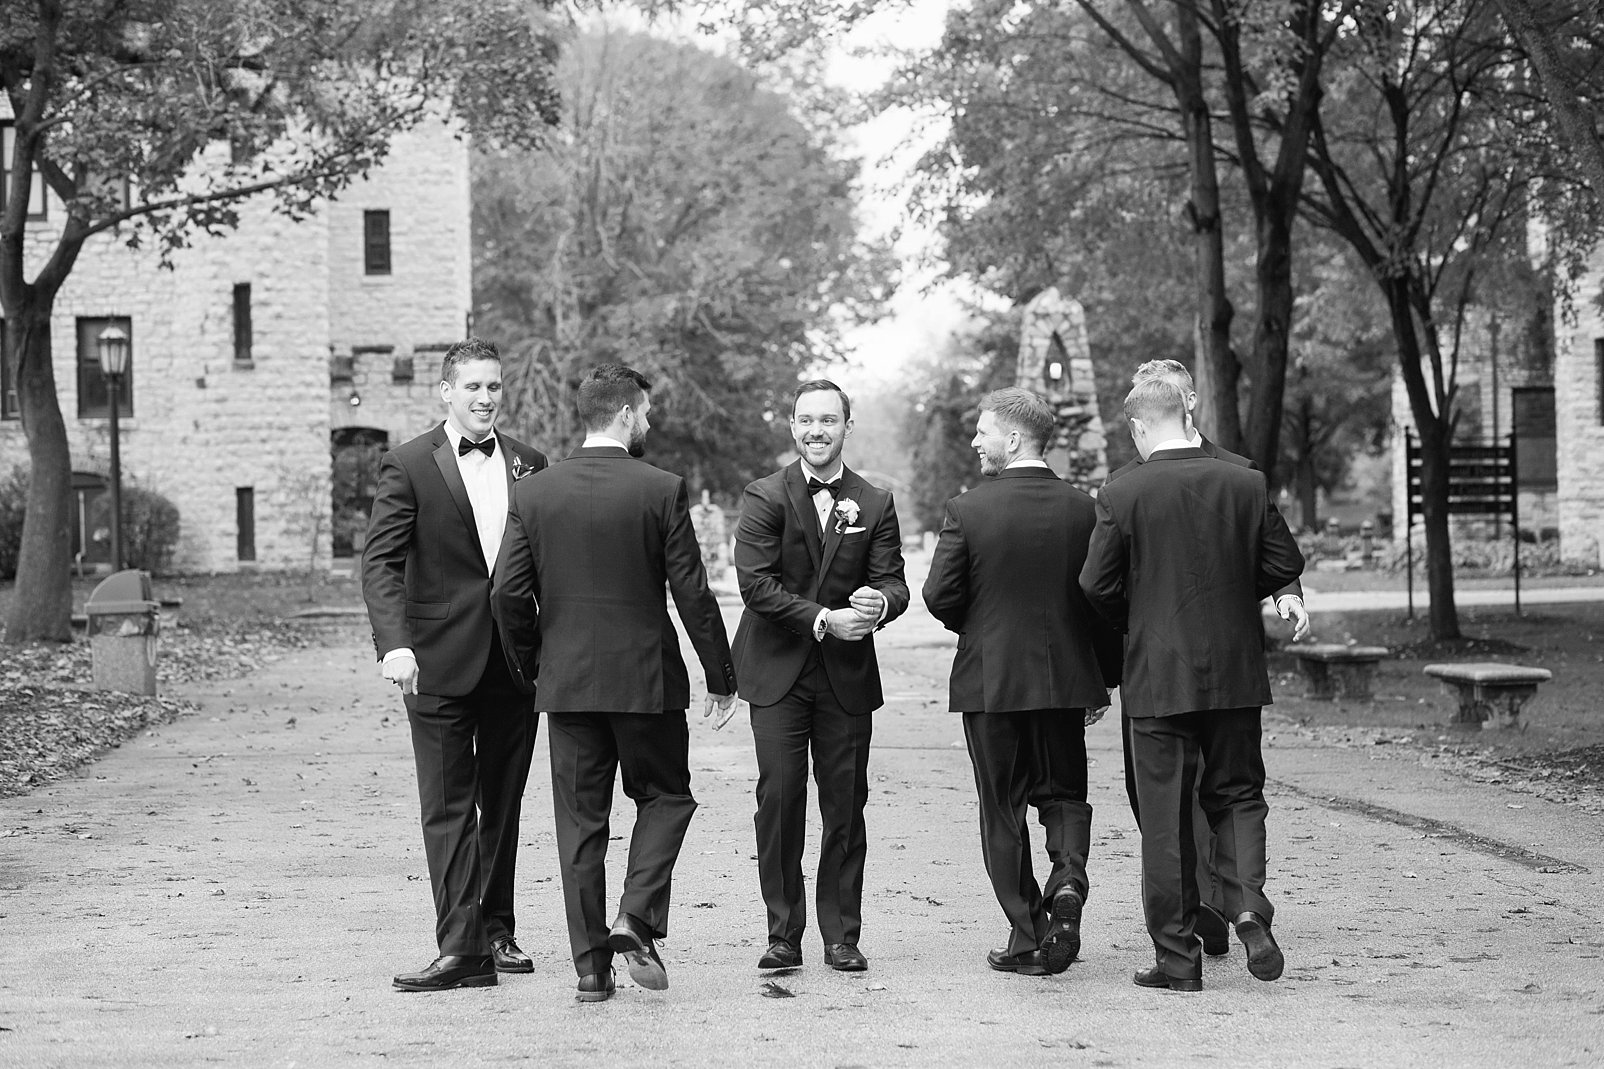 black and white photo of groom and groomsmen